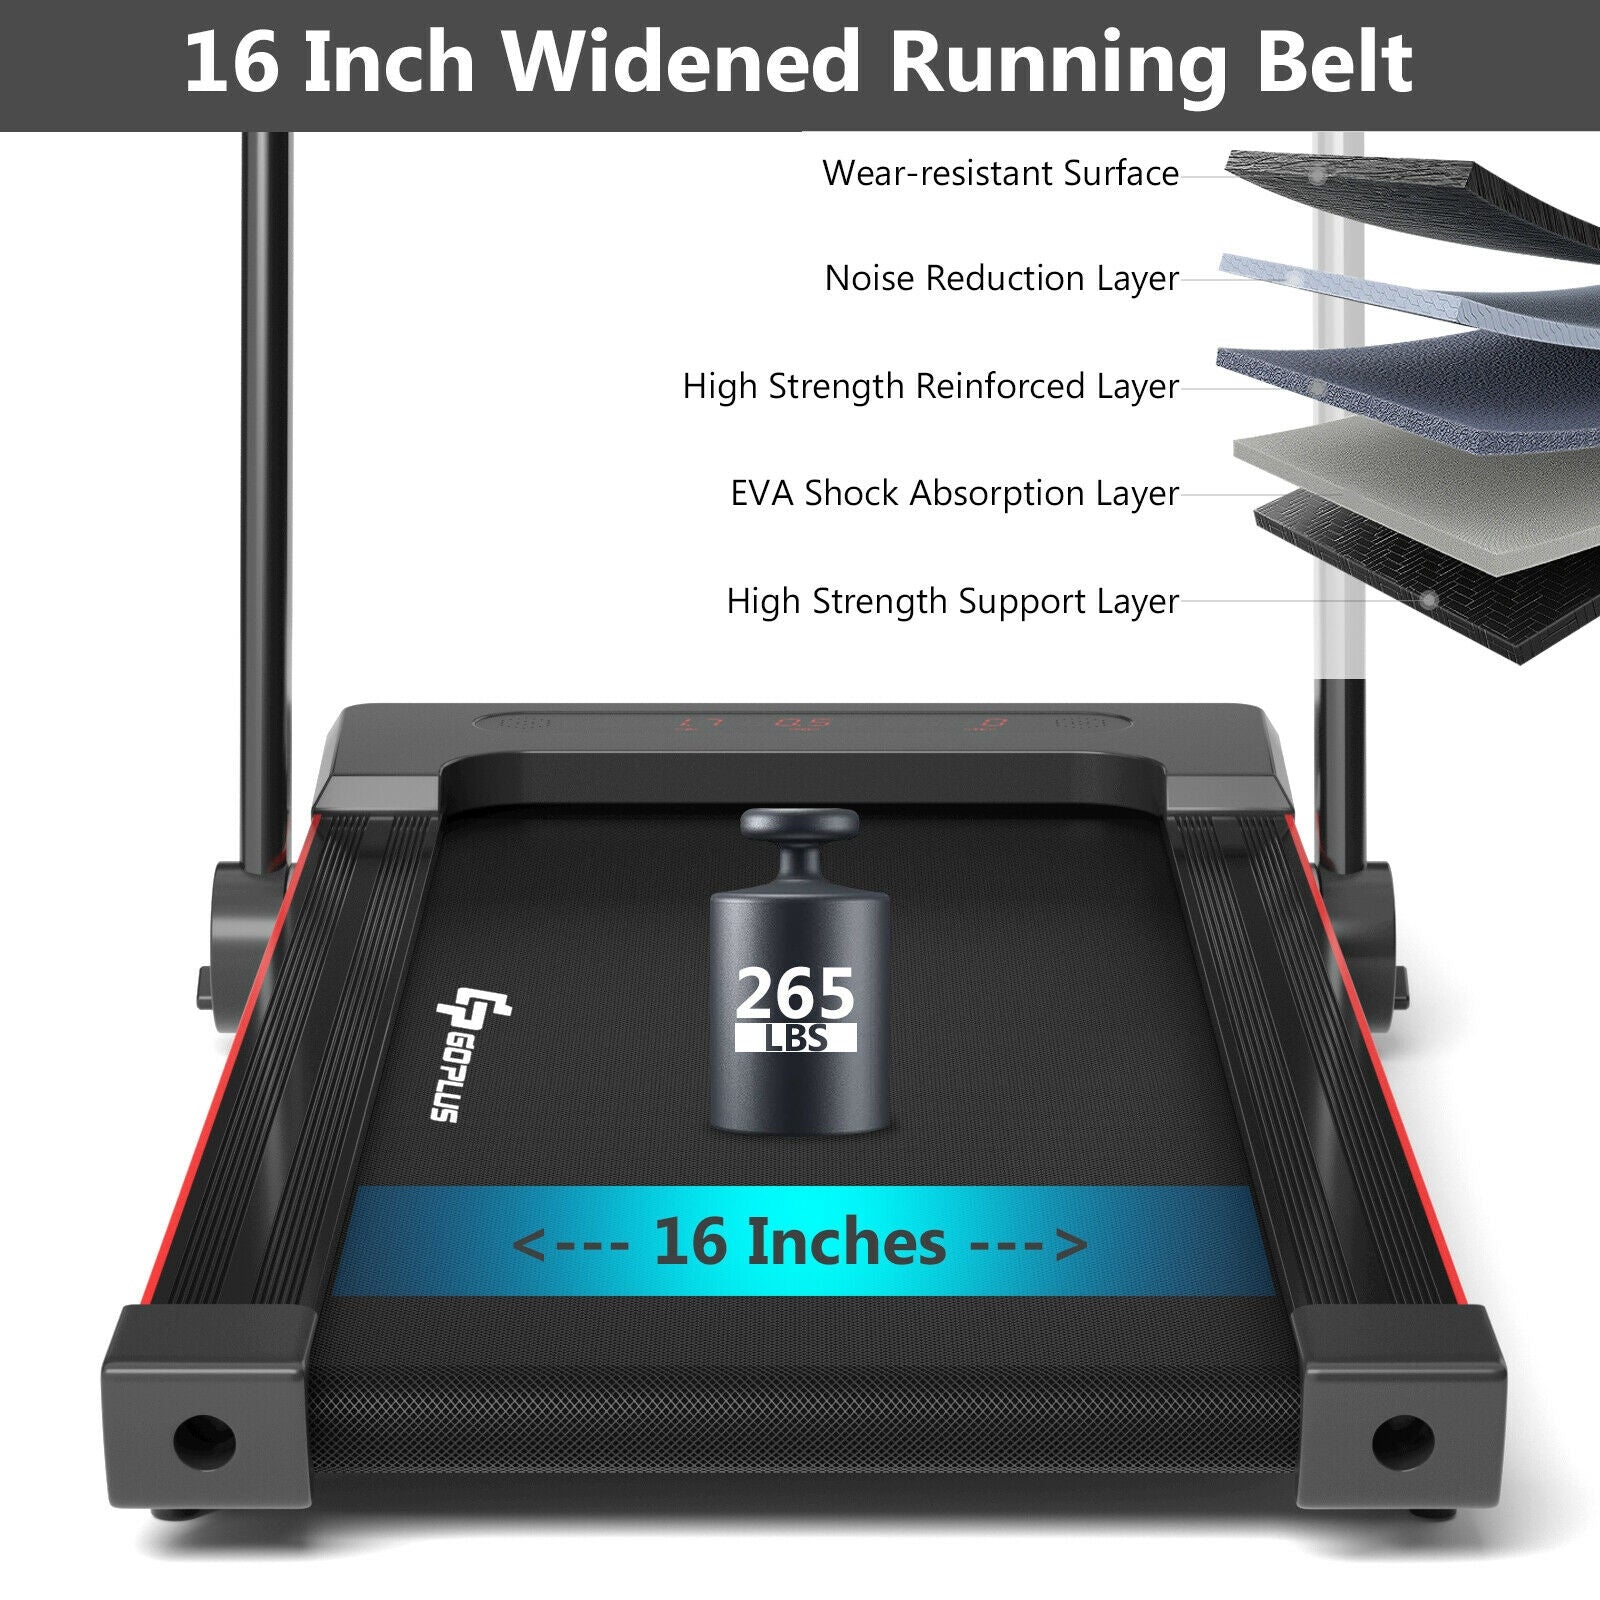 3-in-1 Folding Under Desk Treadmill with Large Desk and LCD Display